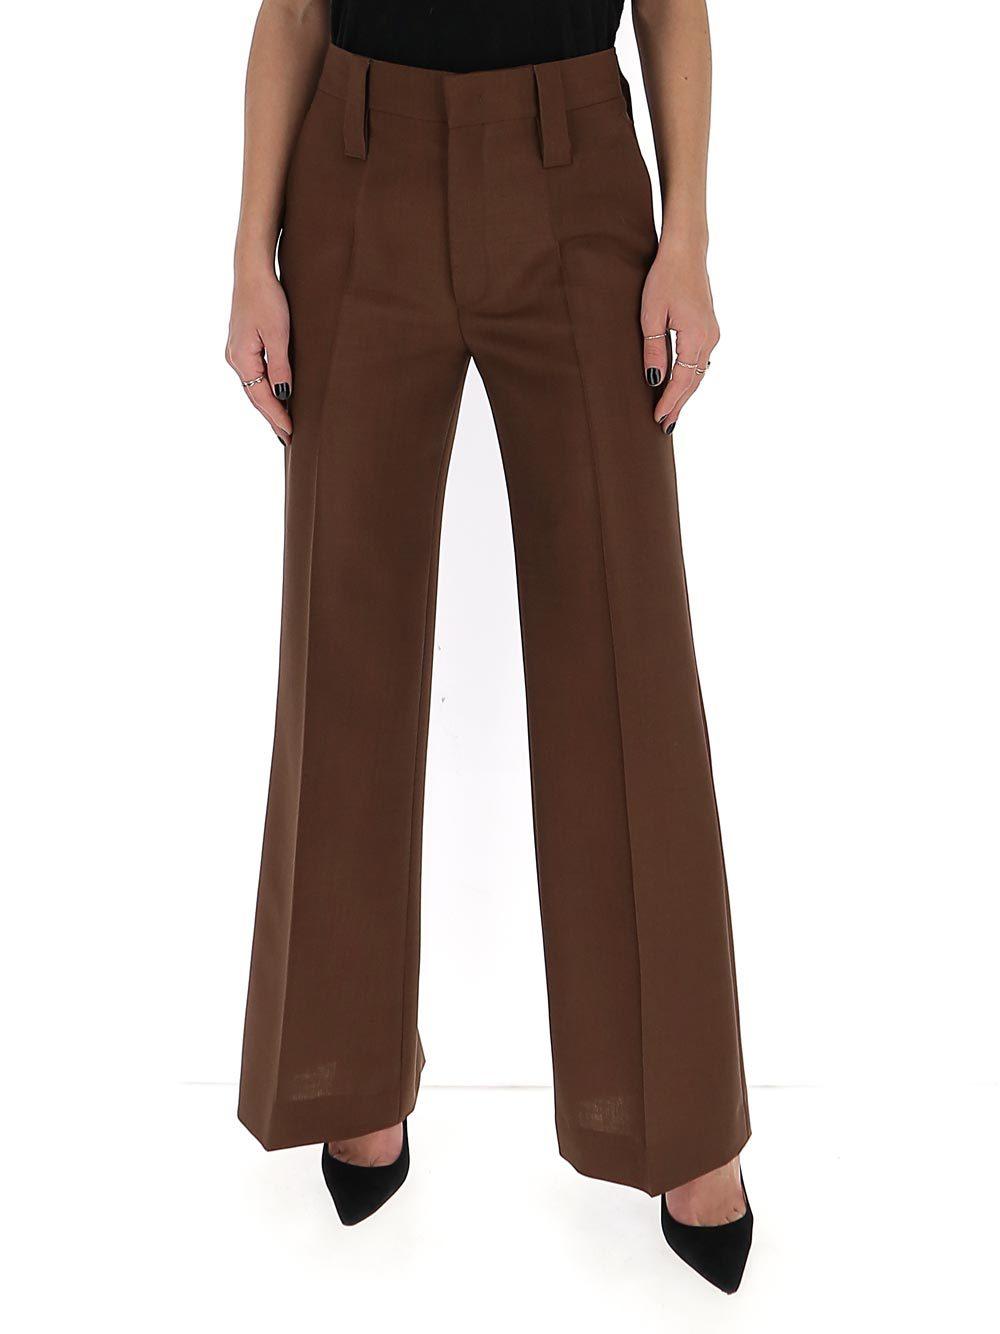 Prada Cotton Flared Pants in Brown - Lyst